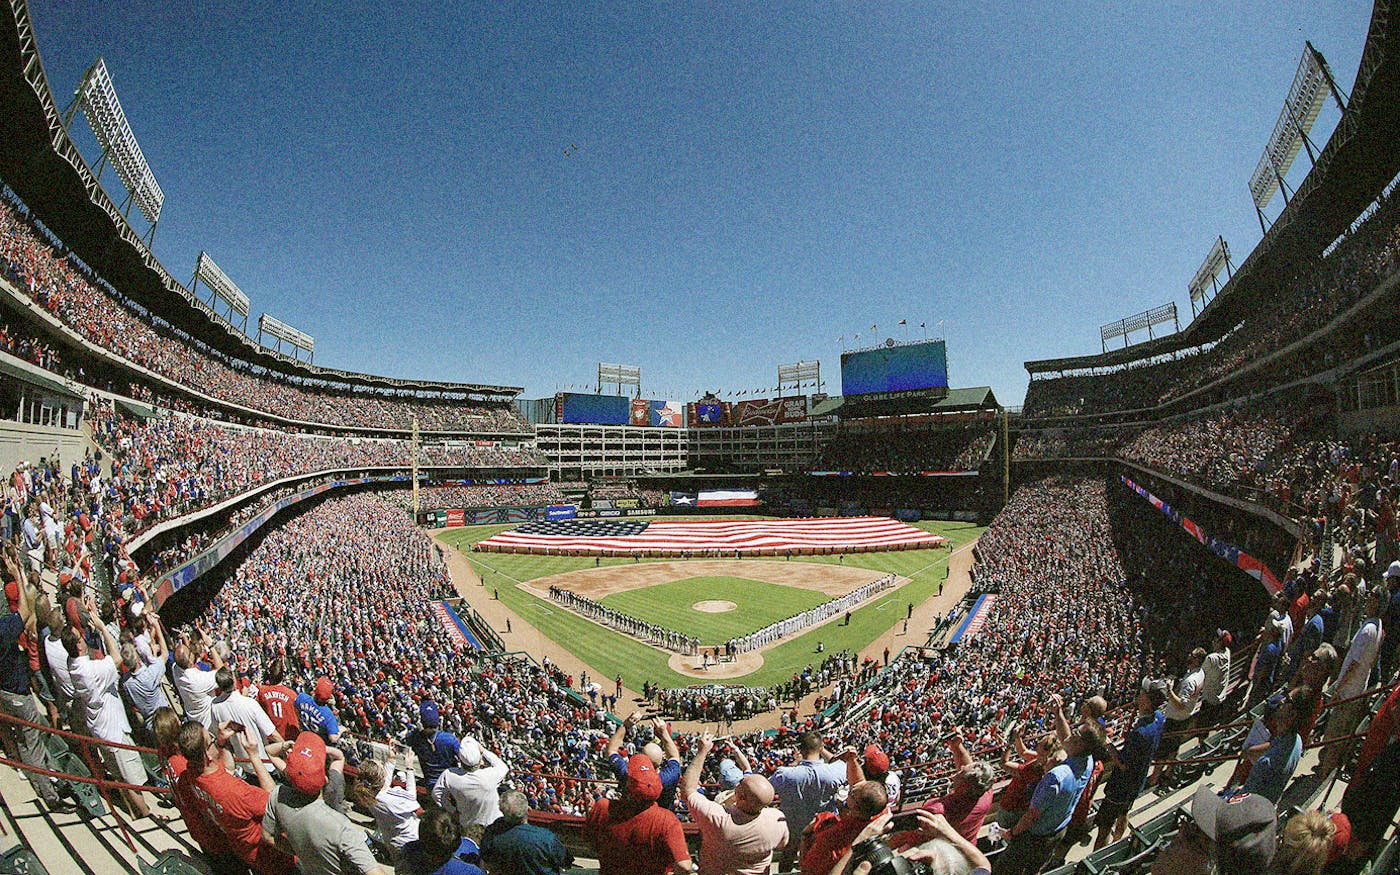 Globe Life Park - history, photos and more of the Texas Rangers former home